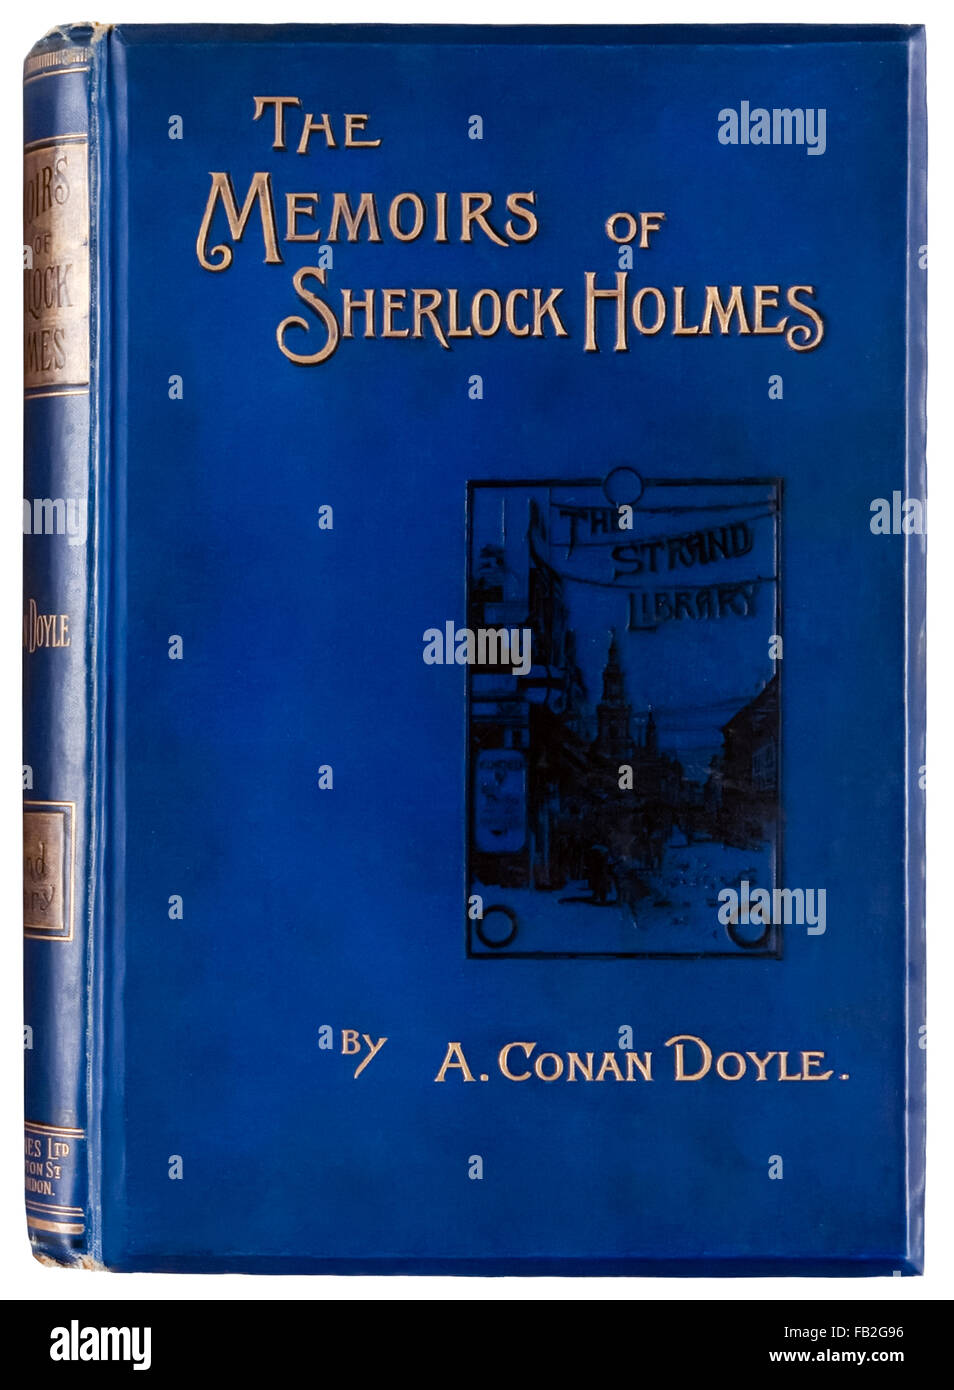 'The Memoirs of Sherlock Holmes' by Sir Arthur Conan Doyle (1859-1930) first edition published in 1894 by George Newnes, London. Stock Photo